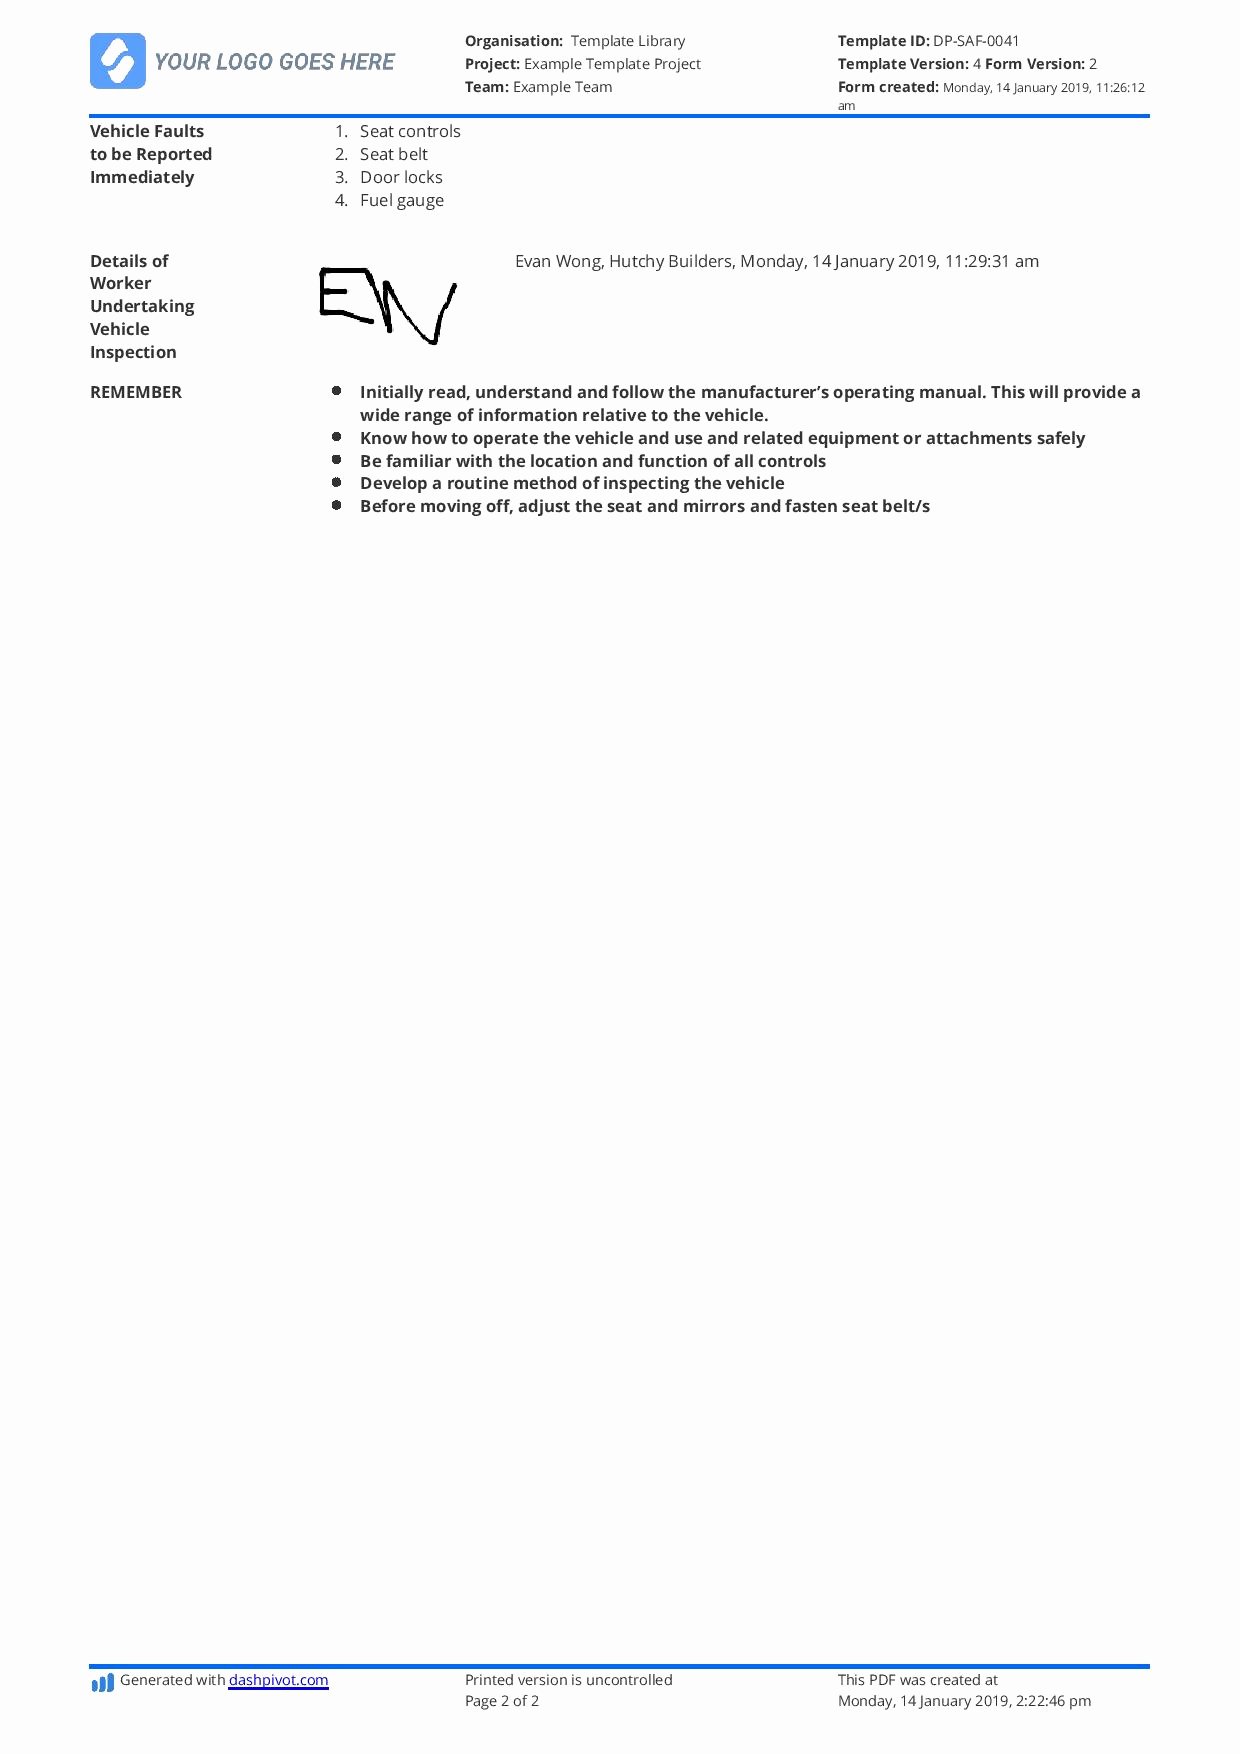 Vehicle Safety Inspection Checklist Template Beautiful Vehicle Safety Inspection Checklist Template Free and